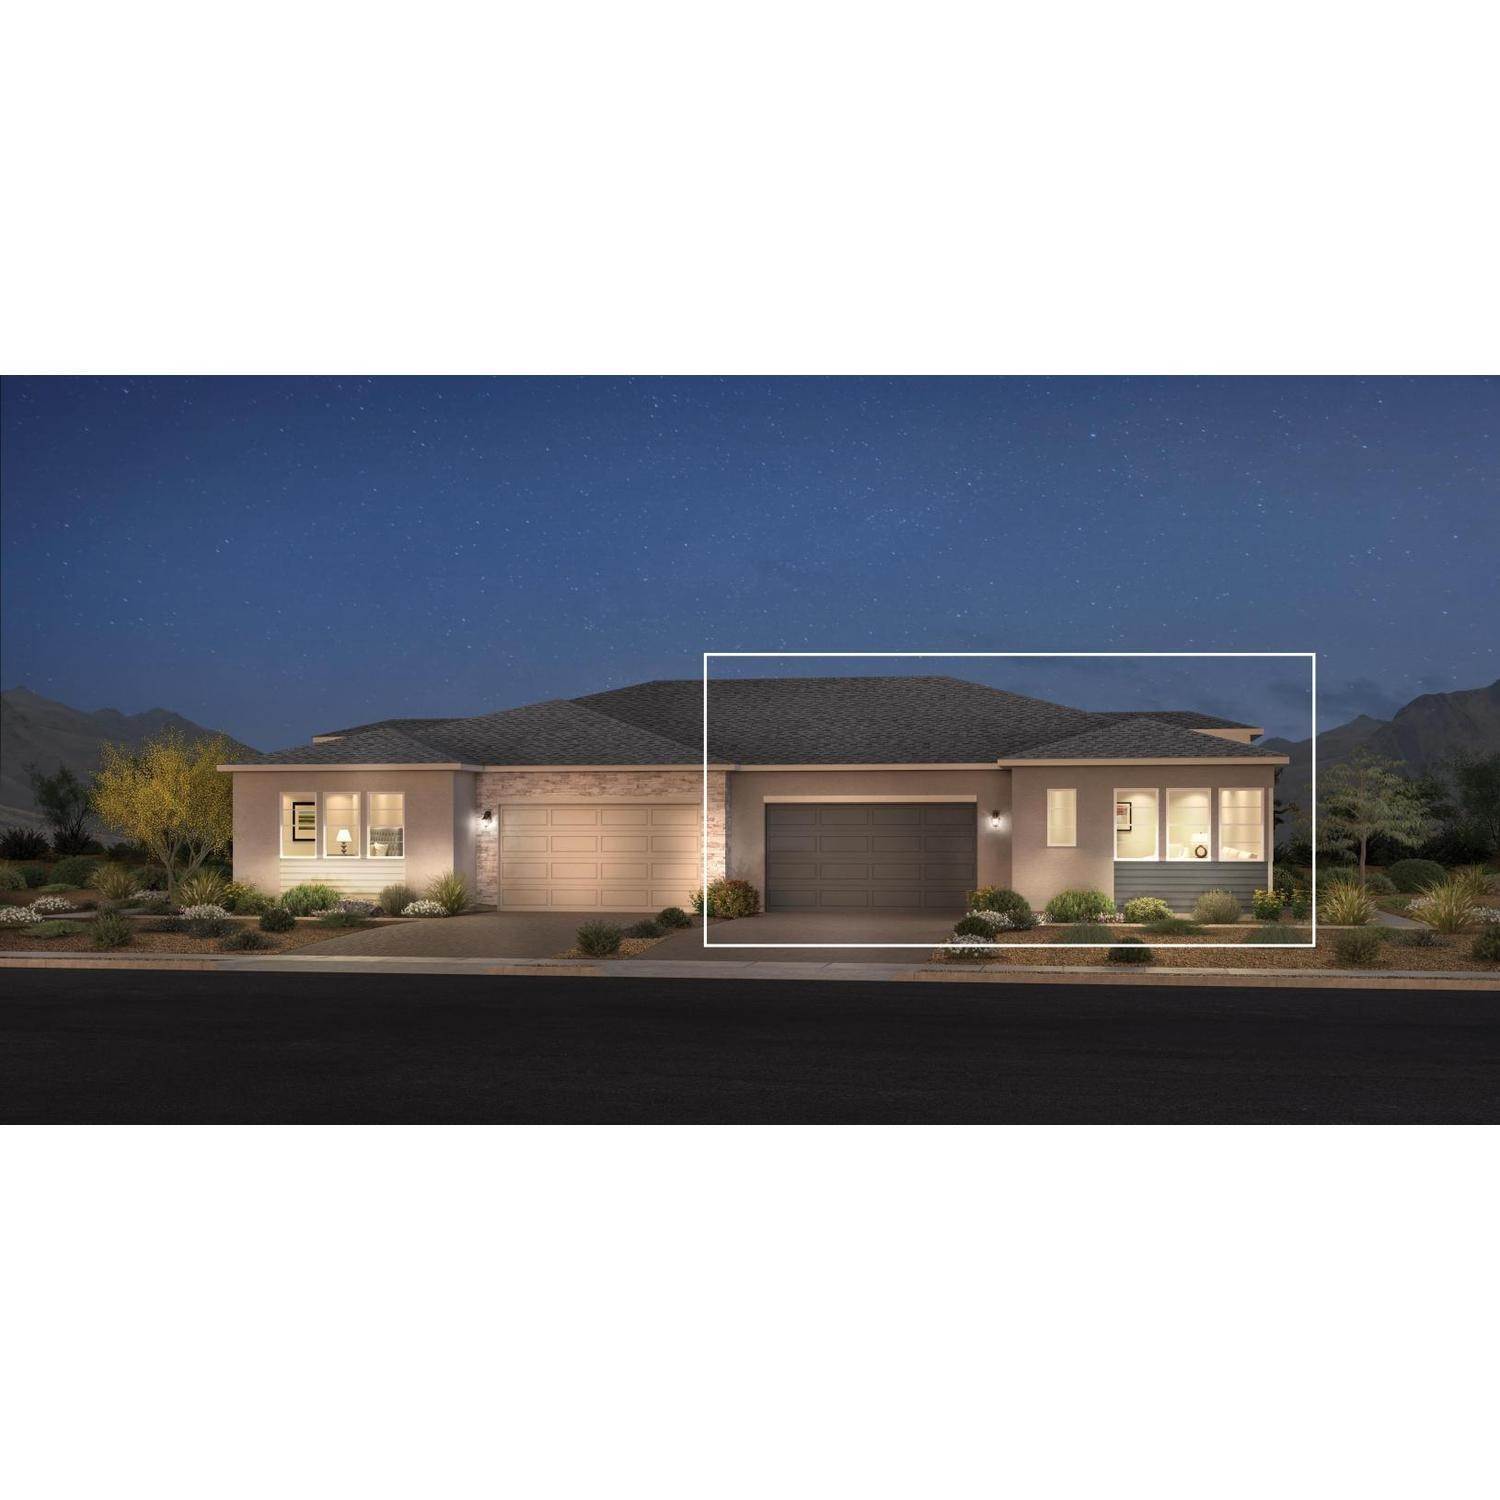 Single Family for Sale at Sparks, NV 89436